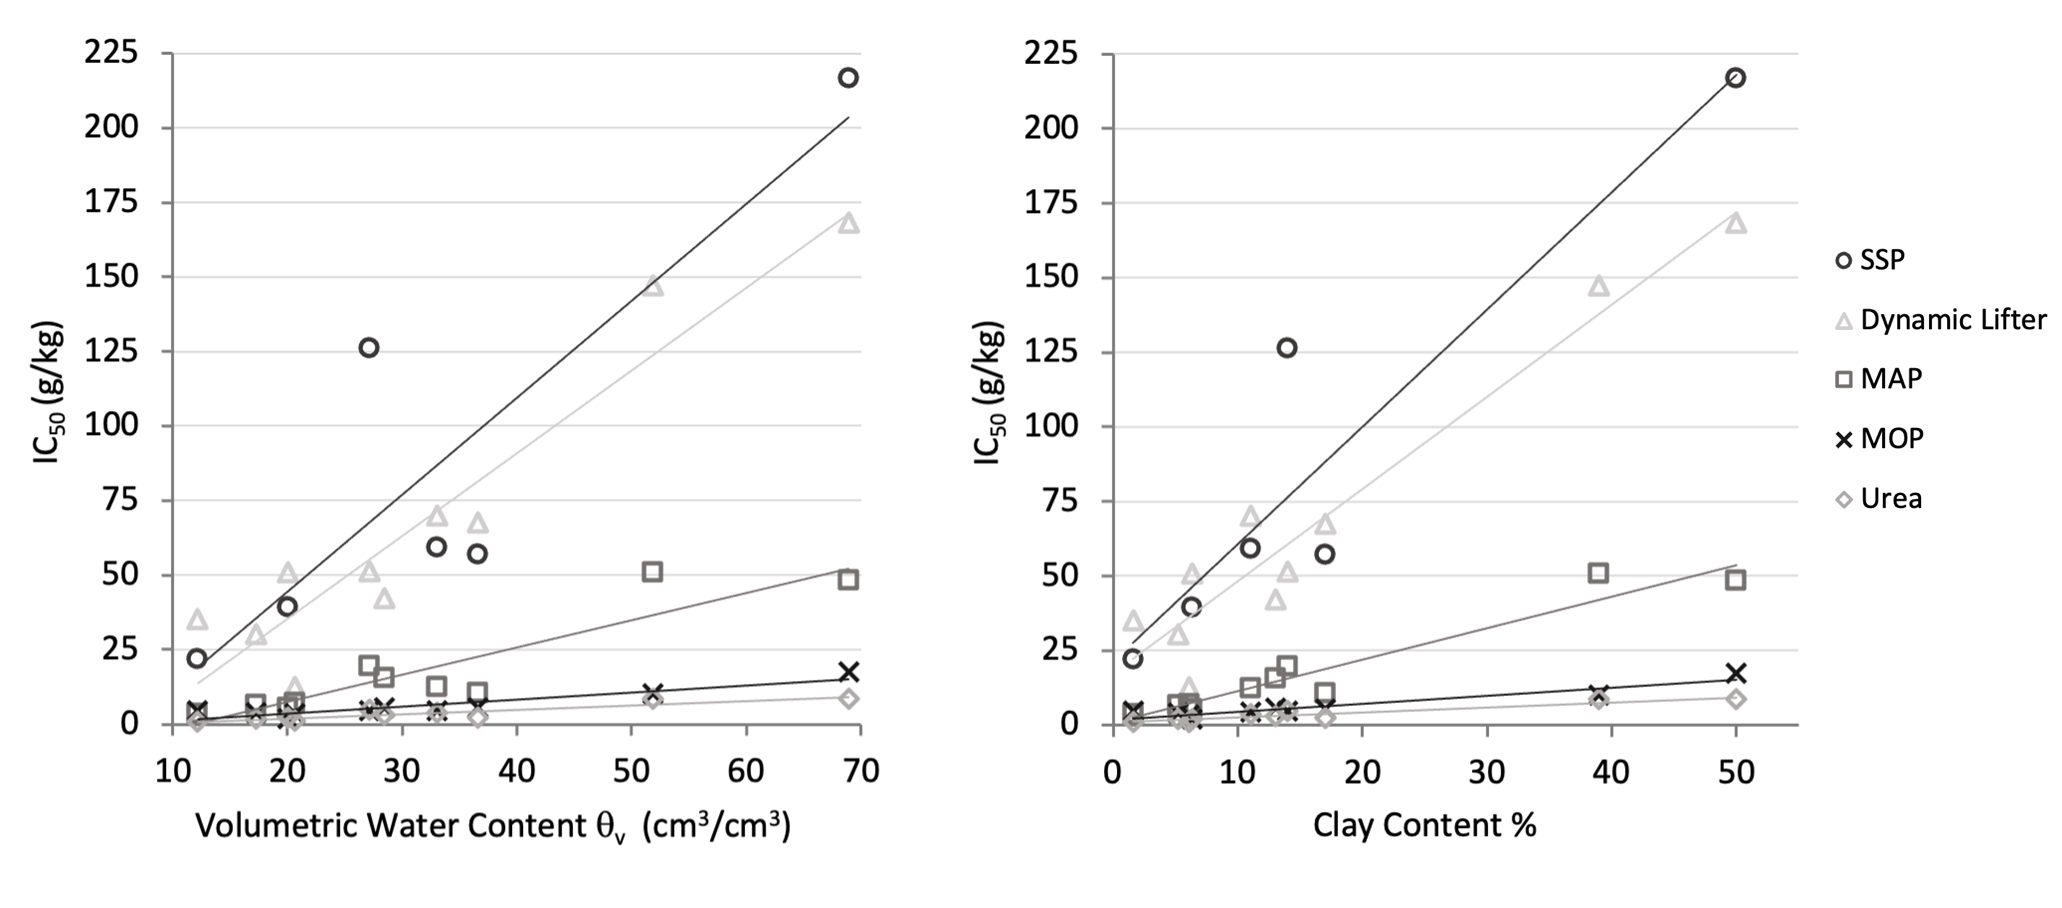 A comparison of the 50% inhibition concentrations (IC50) of five fertilisers, SSP, Dynamic Lifter, MAP, MOP and Urea, as a function of (a) the volumetric water content V (cm3/cm3) or (b) the clay content (%) of the ten soils. 